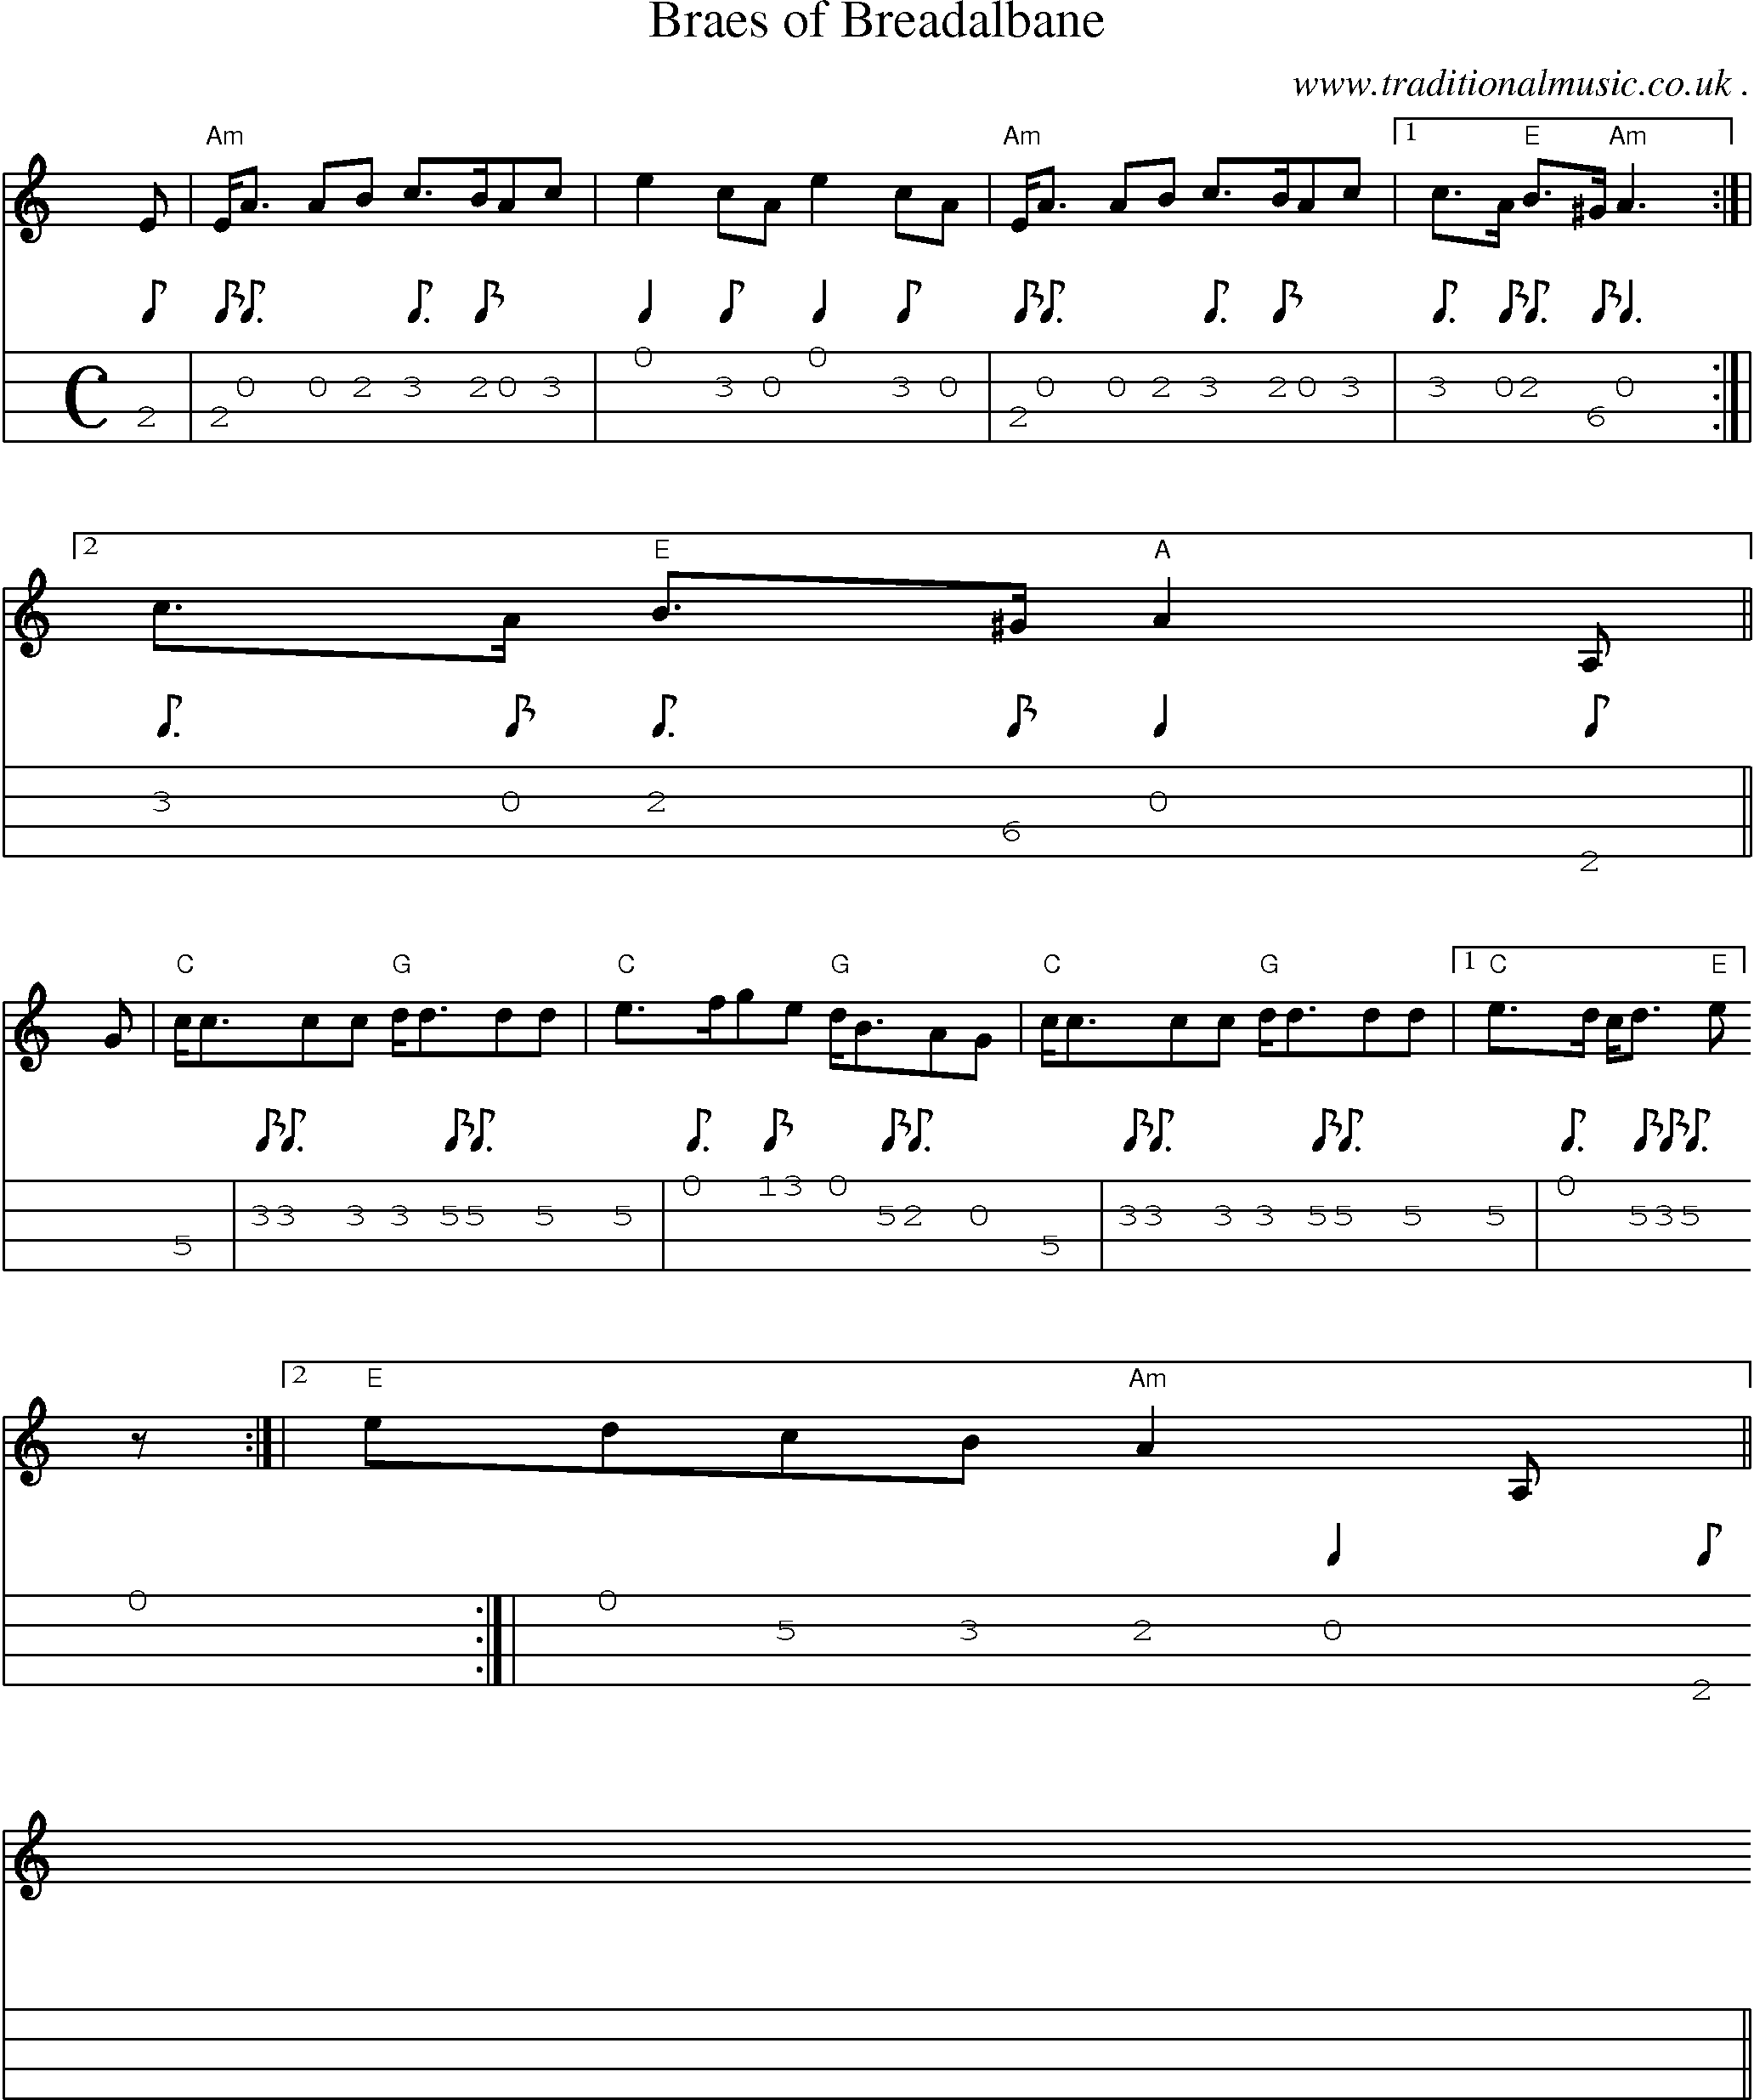 Sheet-music  score, Chords and Mandolin Tabs for Braes Of Breadalbane